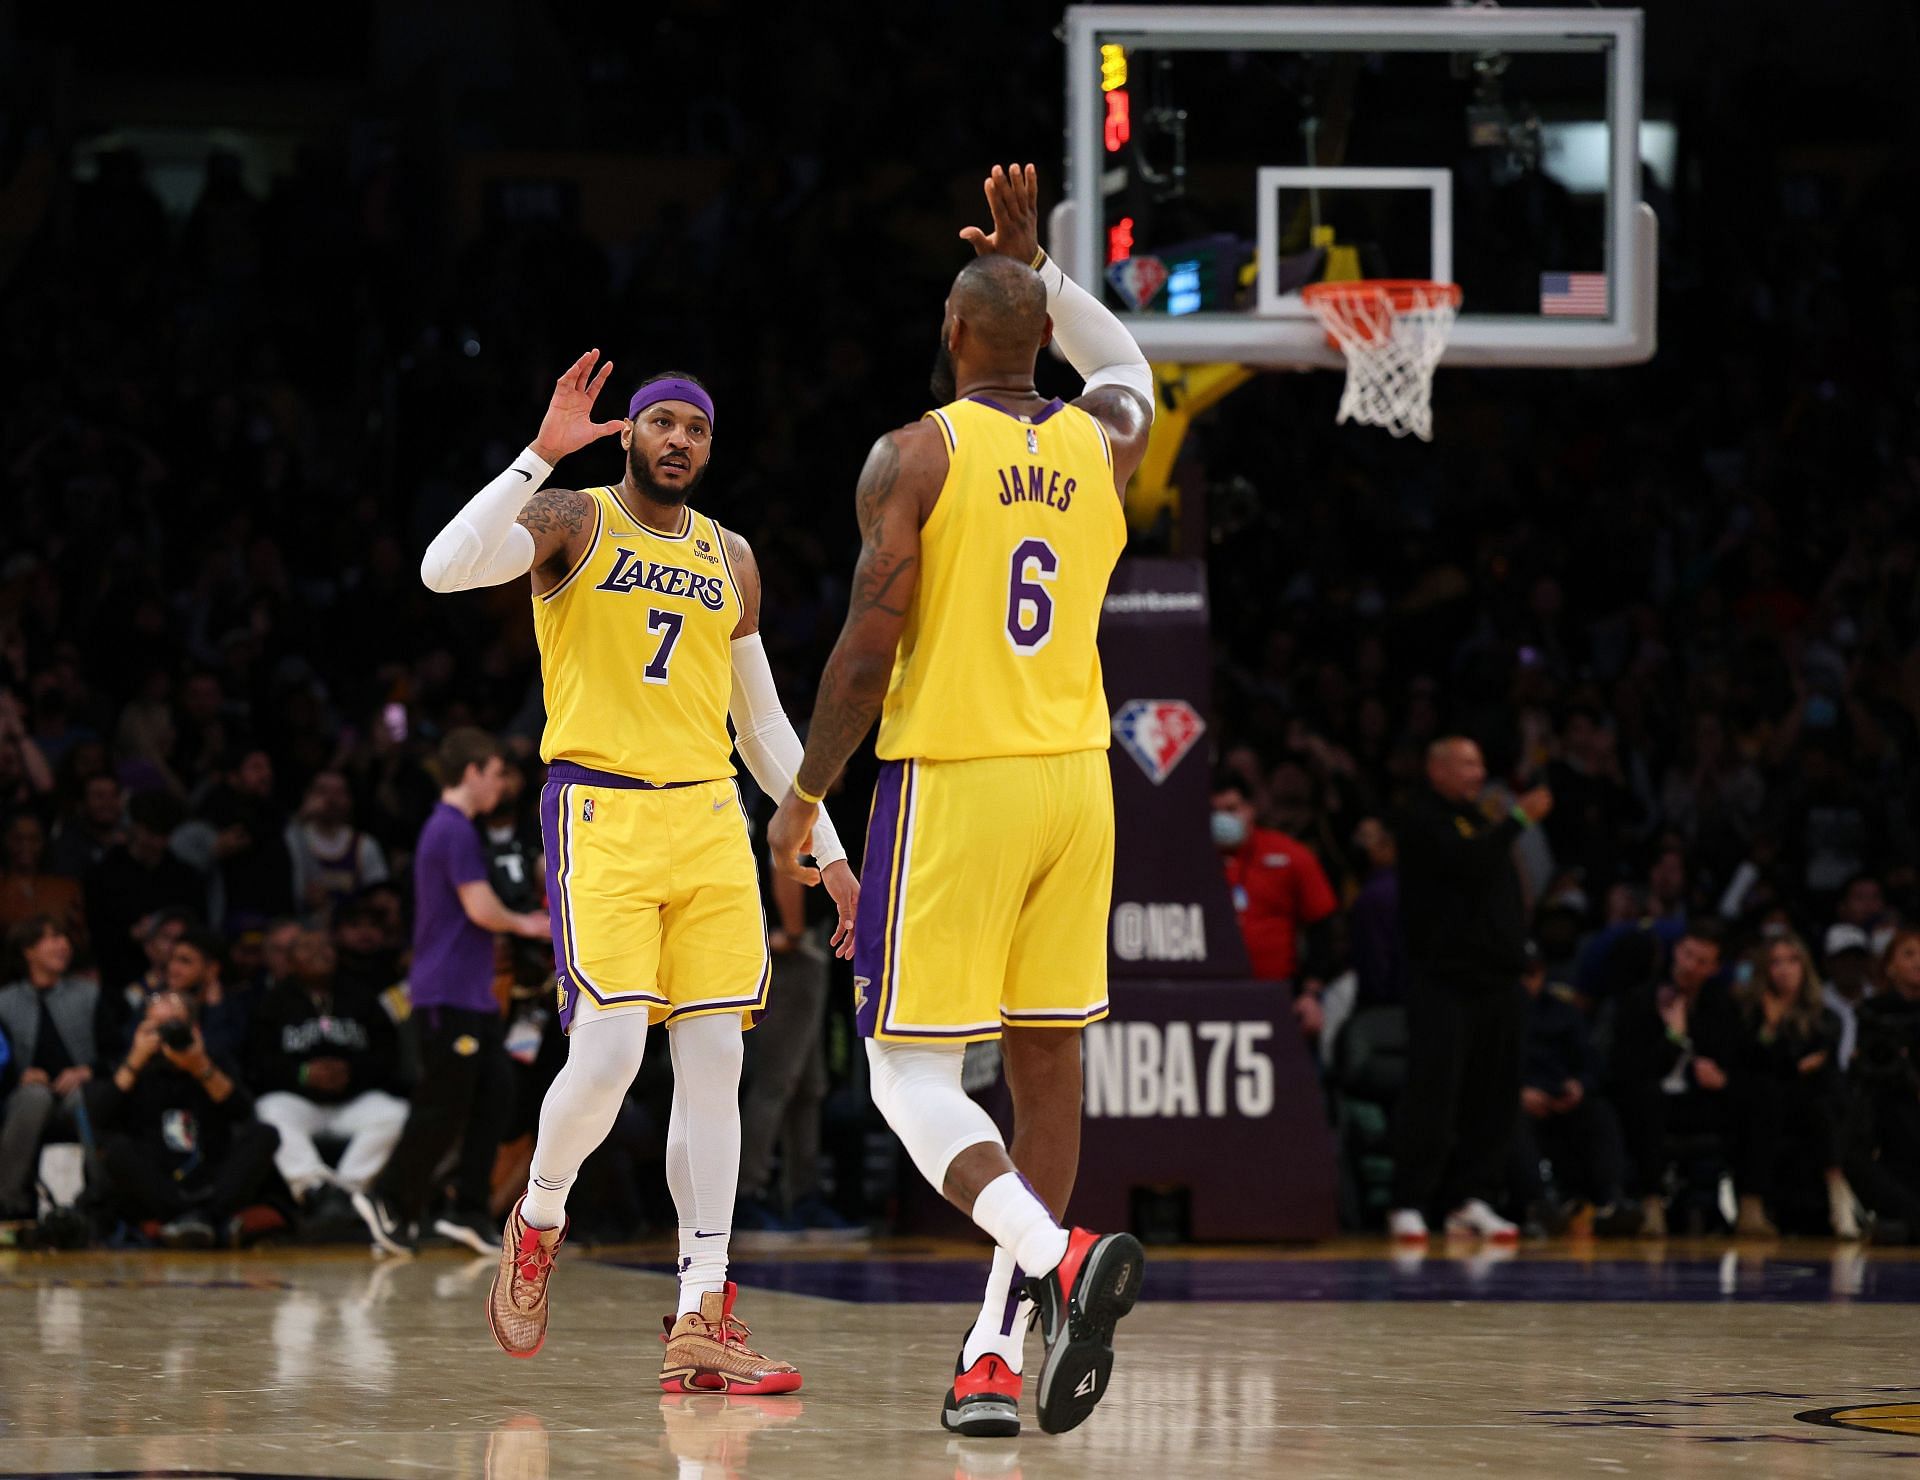 Carmelo Anthony and LeBron played together on the Lakers (Image via Getty Images)